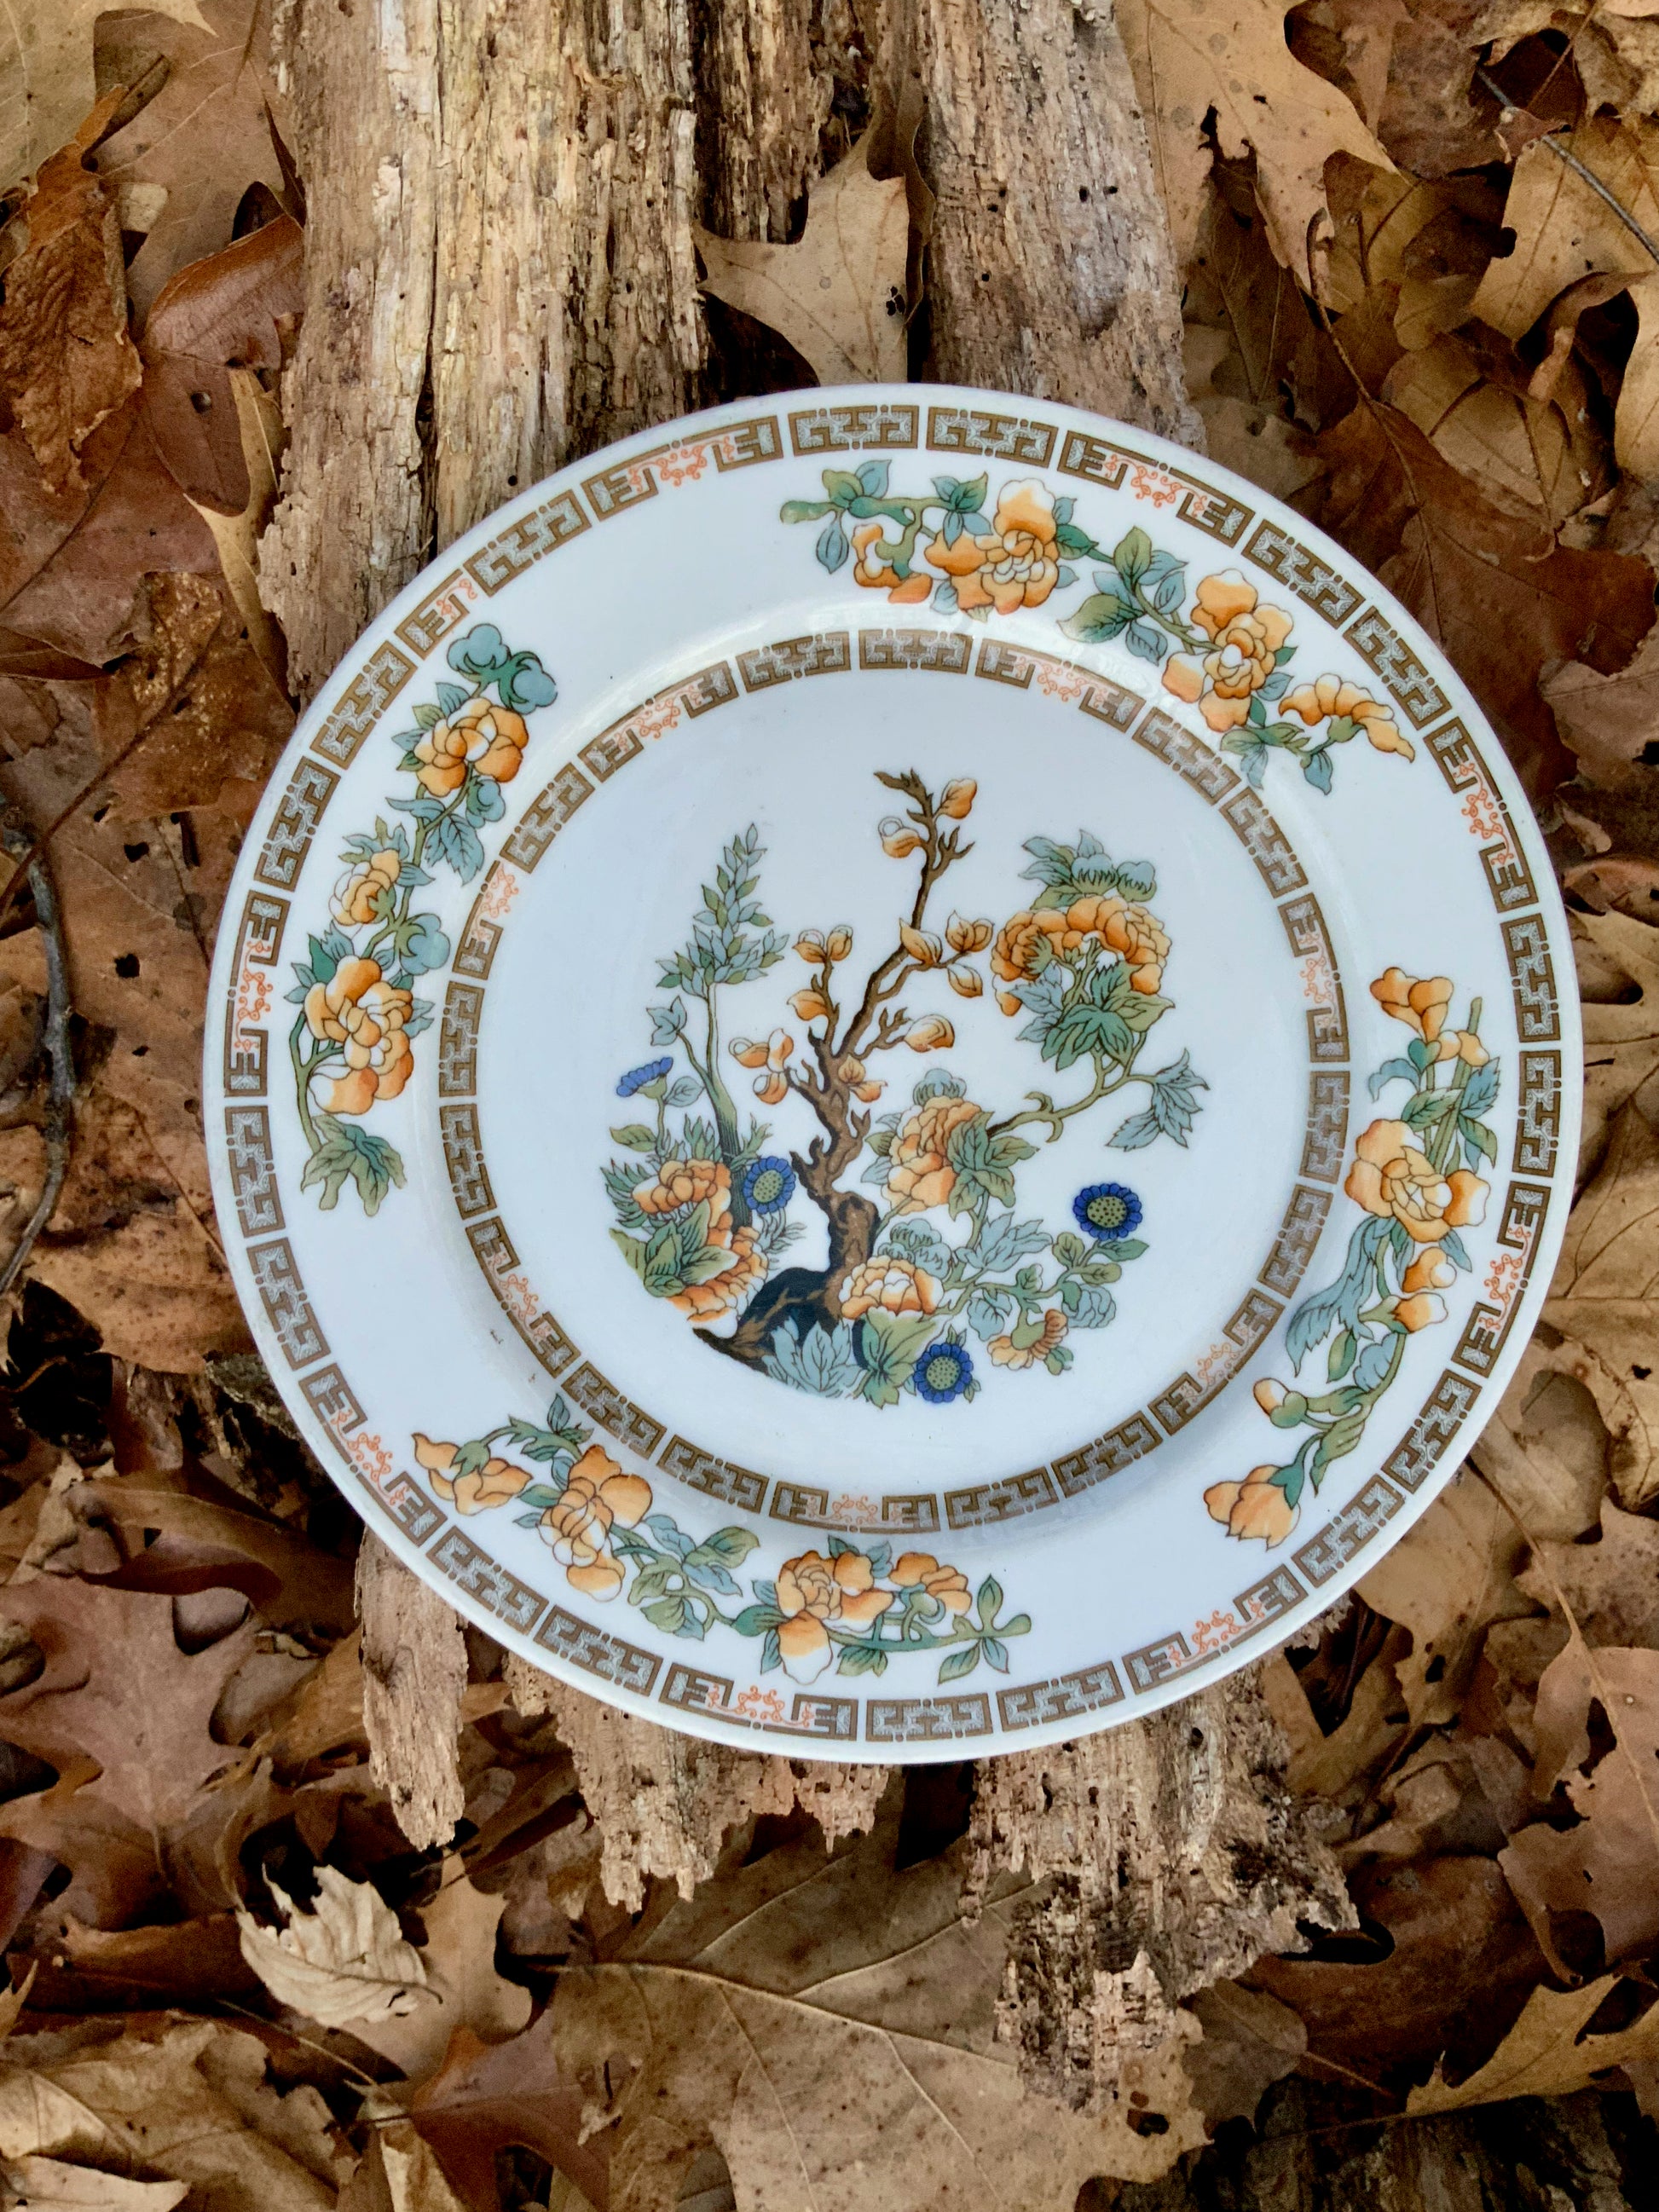 Antique bread or cake plate made by Syracuse China for the Railroads in 1930s  #RailroadDinnerware #SyracuseChina #AntiqueChinaPlates - DharBazaar